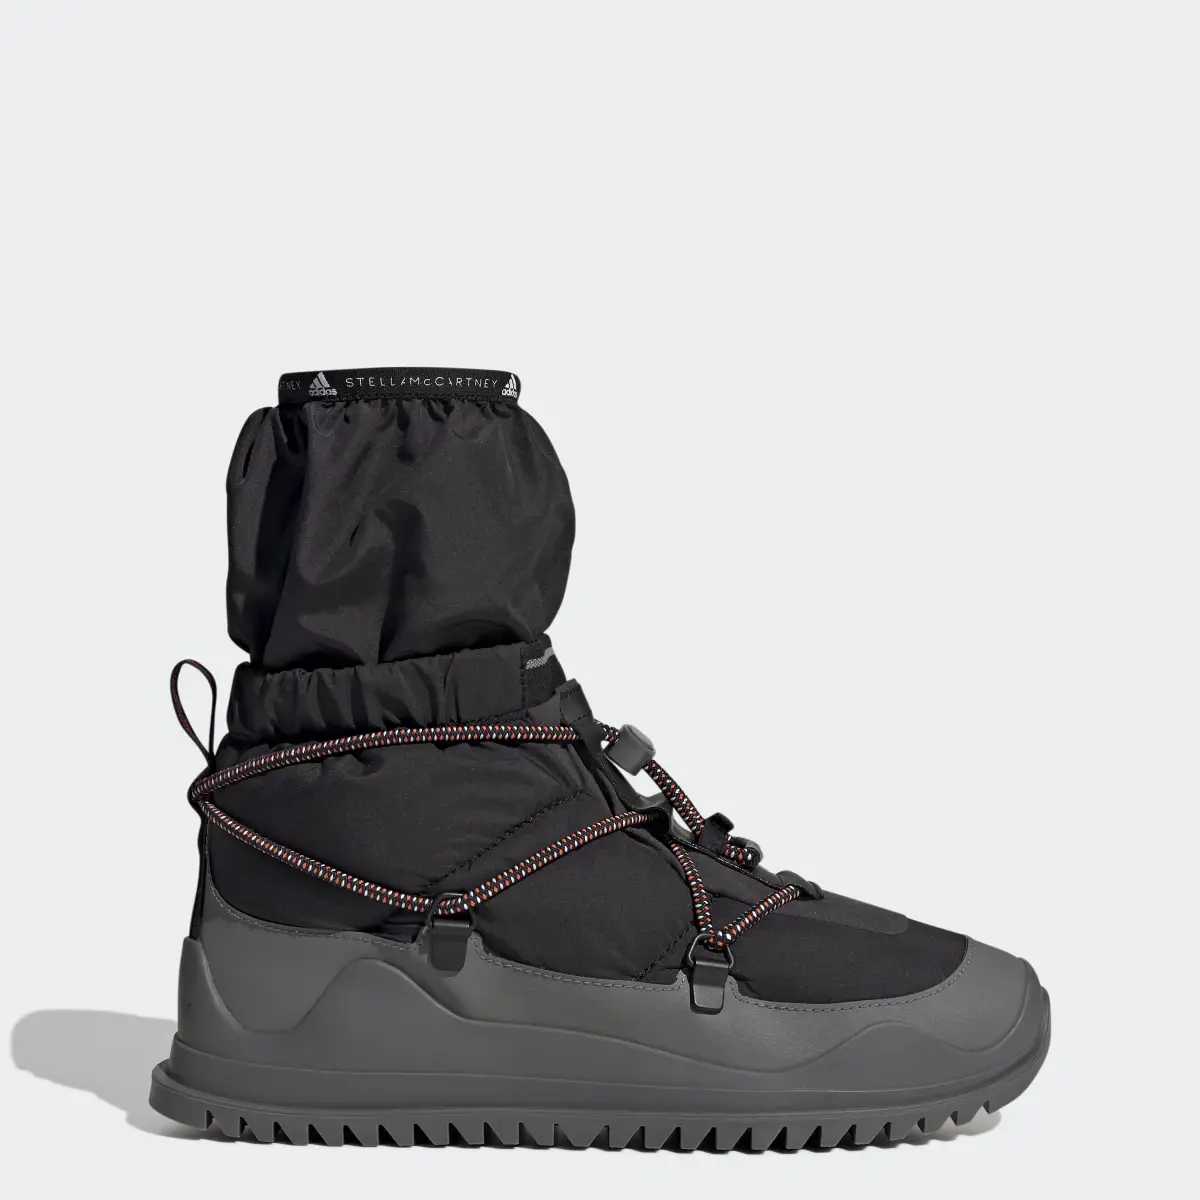 Adidas by Stella McCartney COLD.RDY Winter Boots. 1